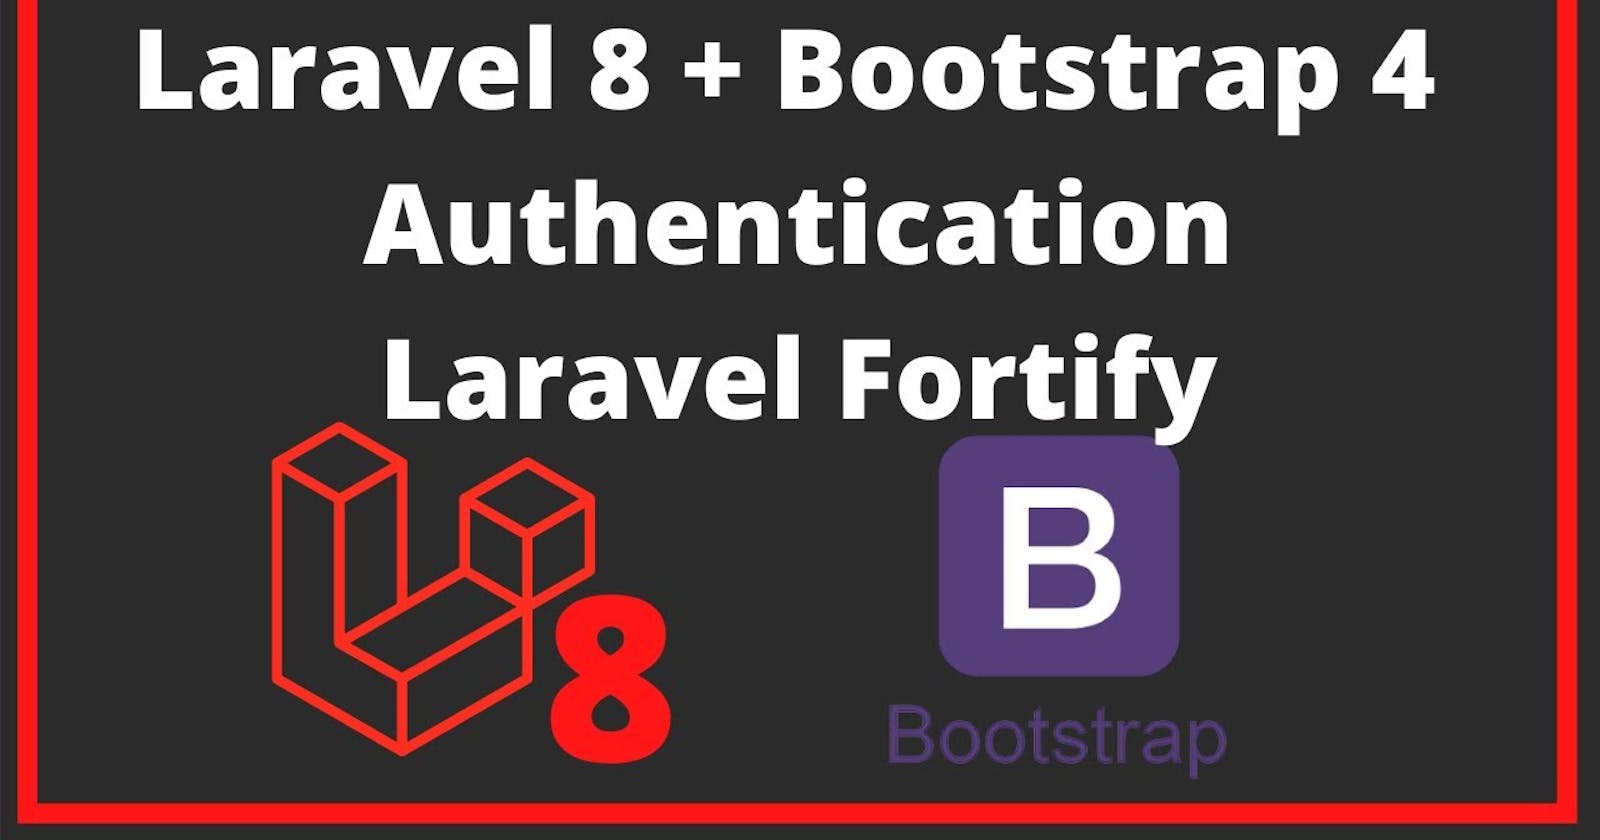 Complete Laravel 8 Authentication Using Laravel Fortify and Bootstrap 4 - Part 2